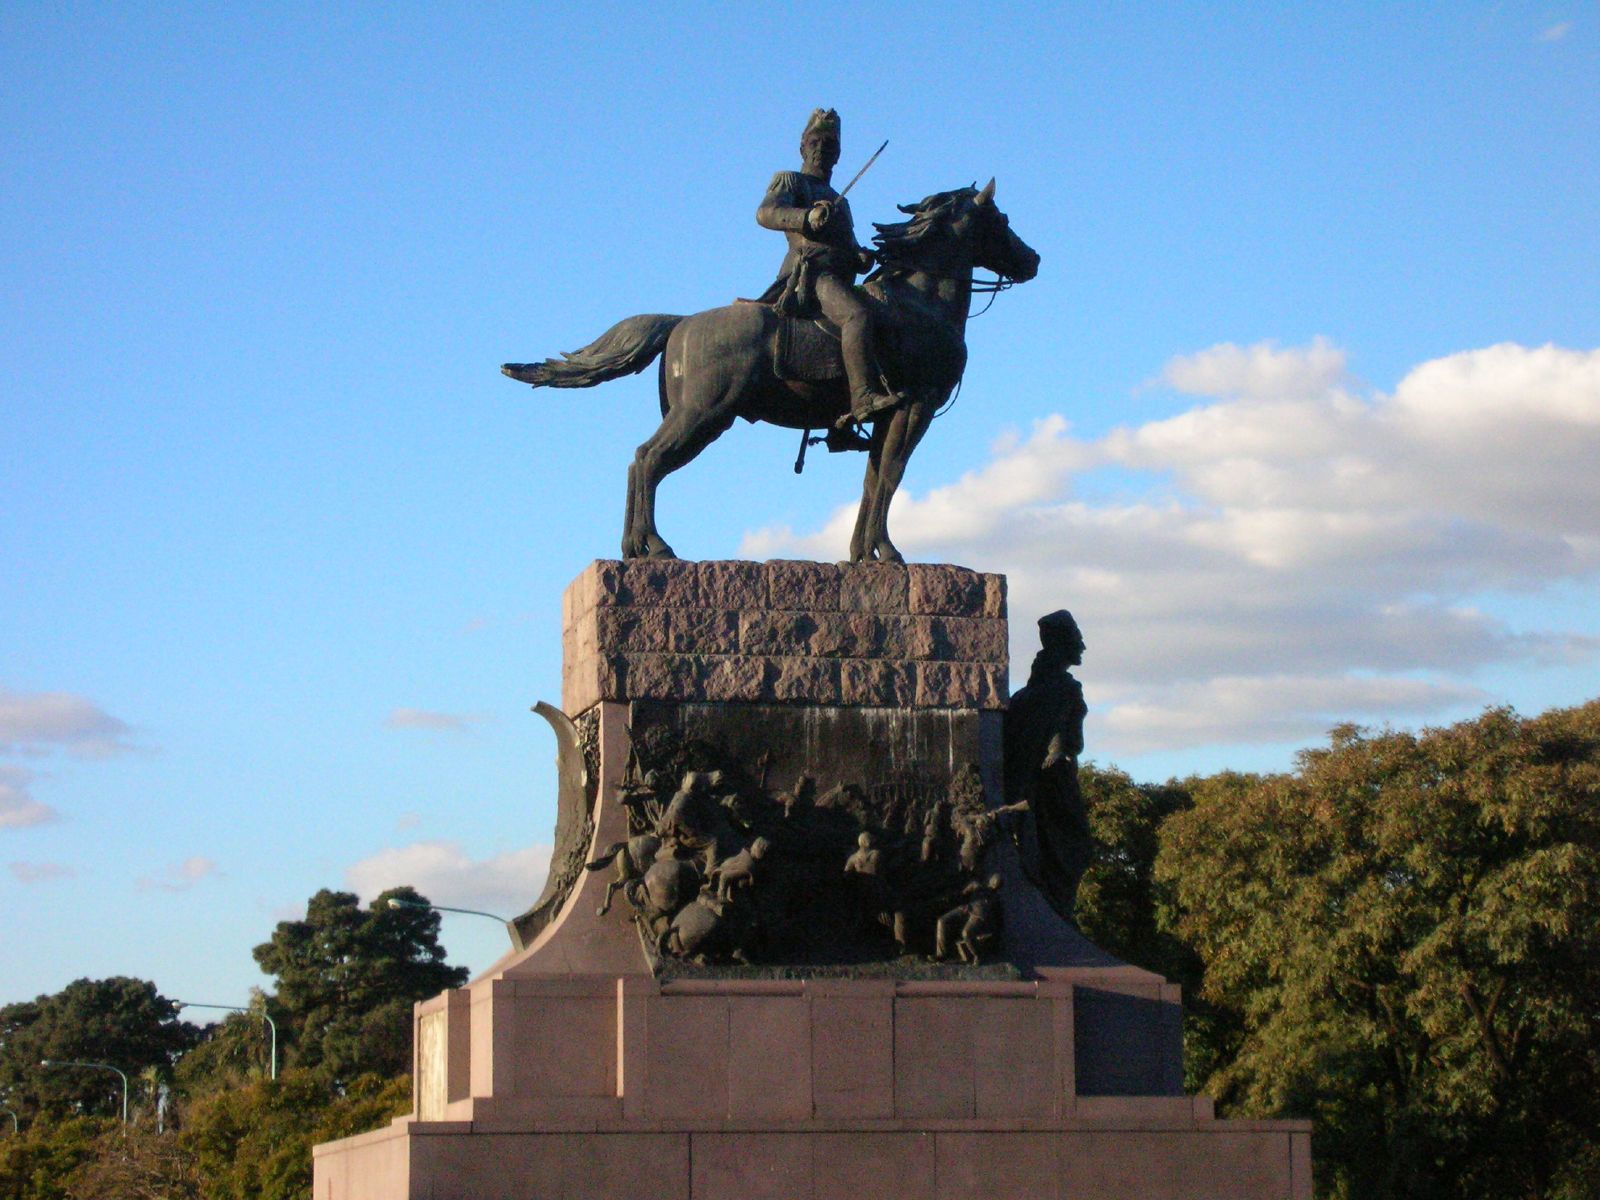 there is a statue of a person on a horse